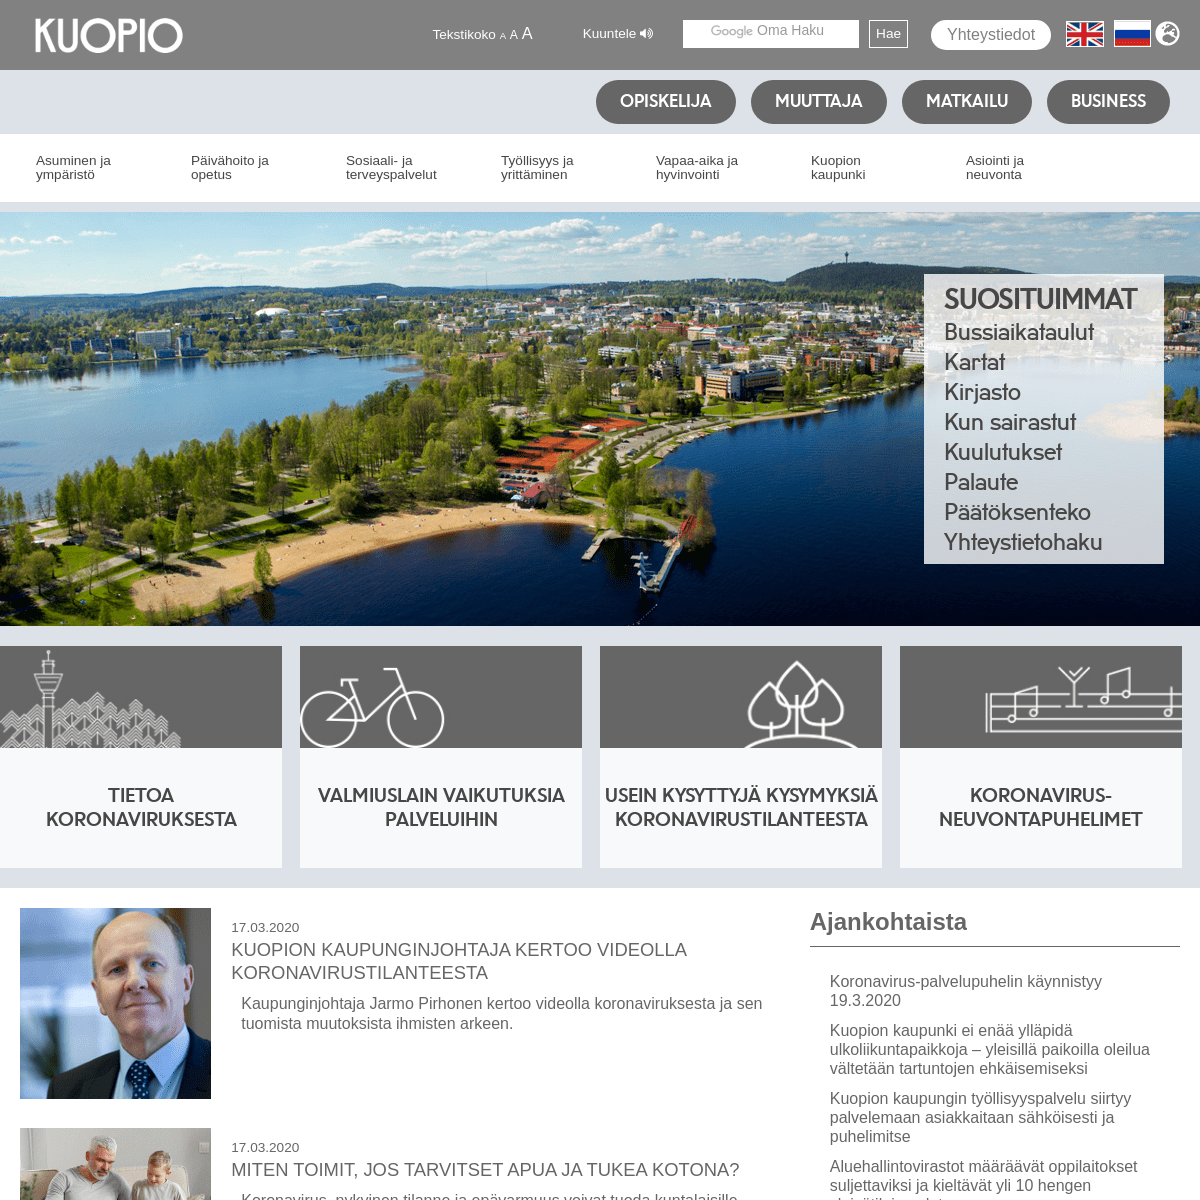 A complete backup of kuopio.fi